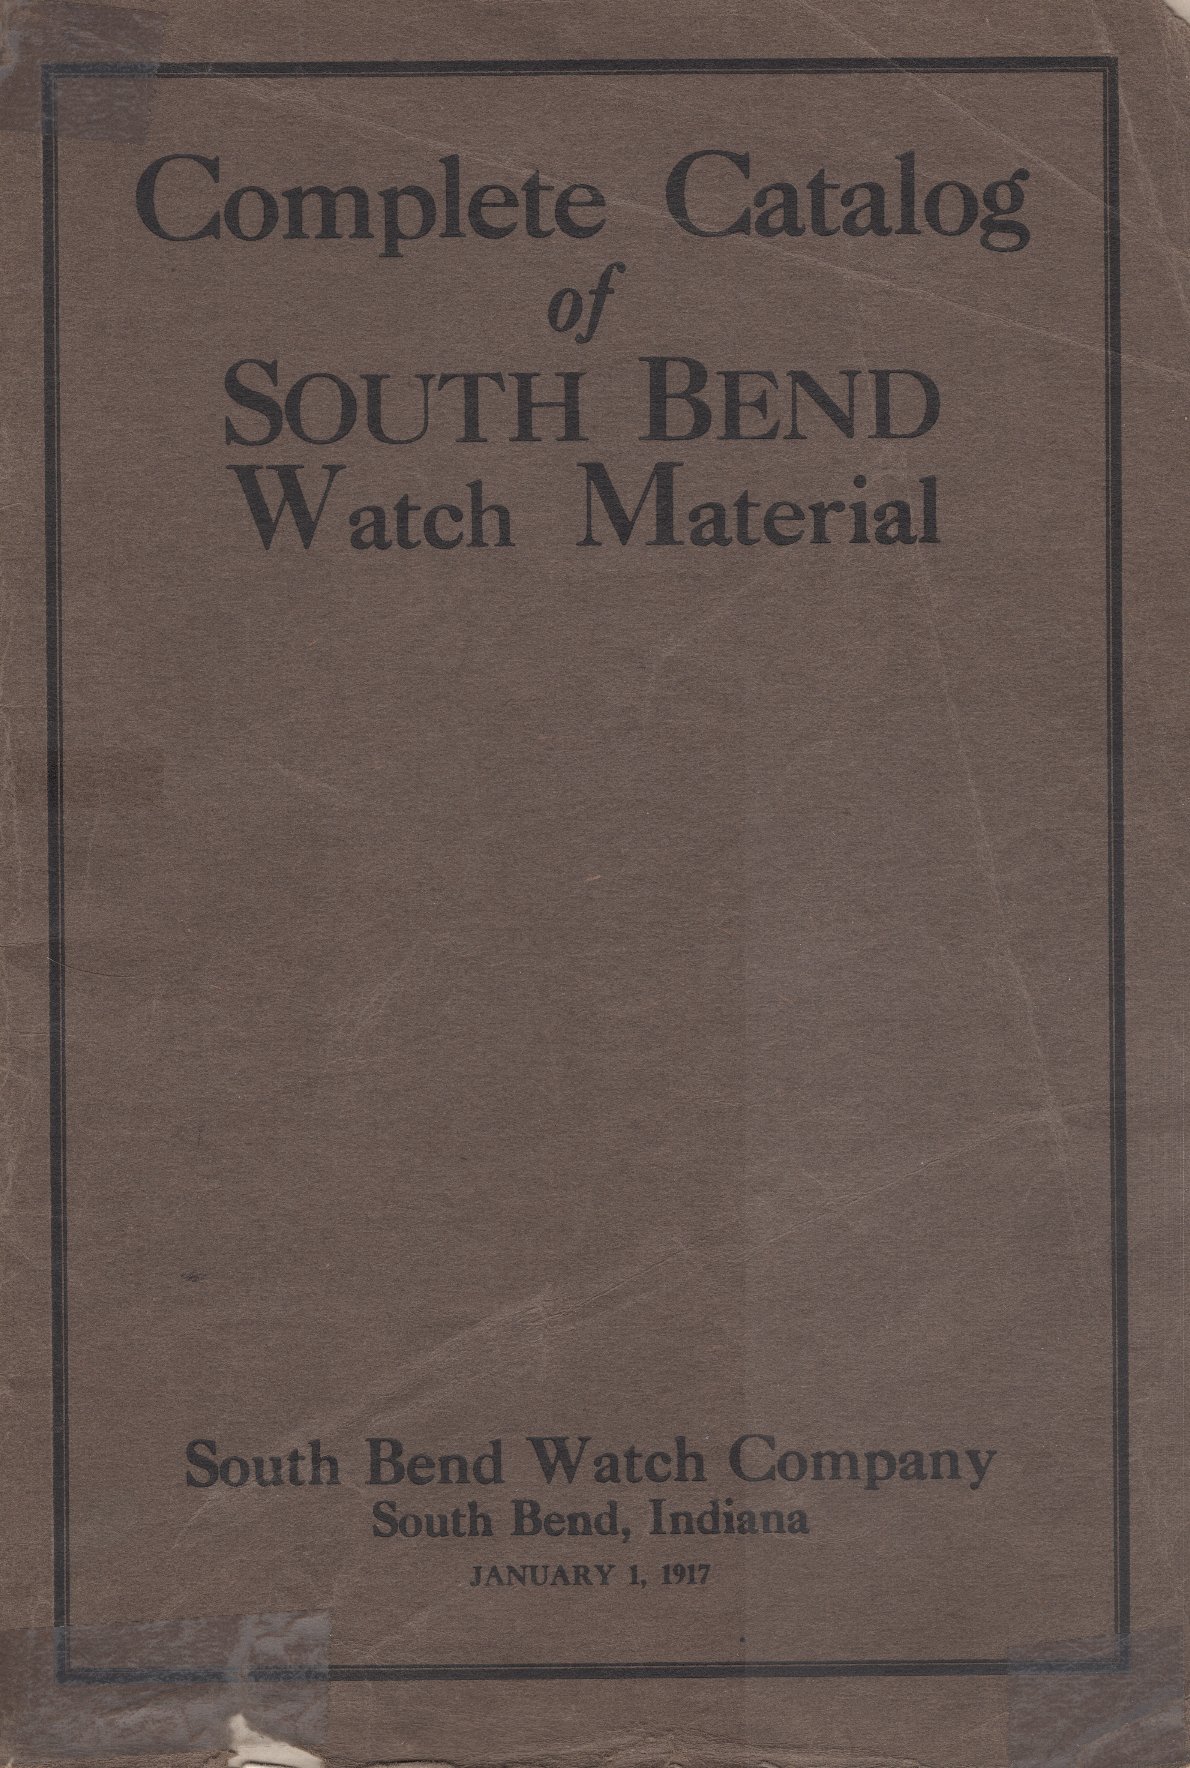 South Bend Watch Material Catalog (1917) Cover Image